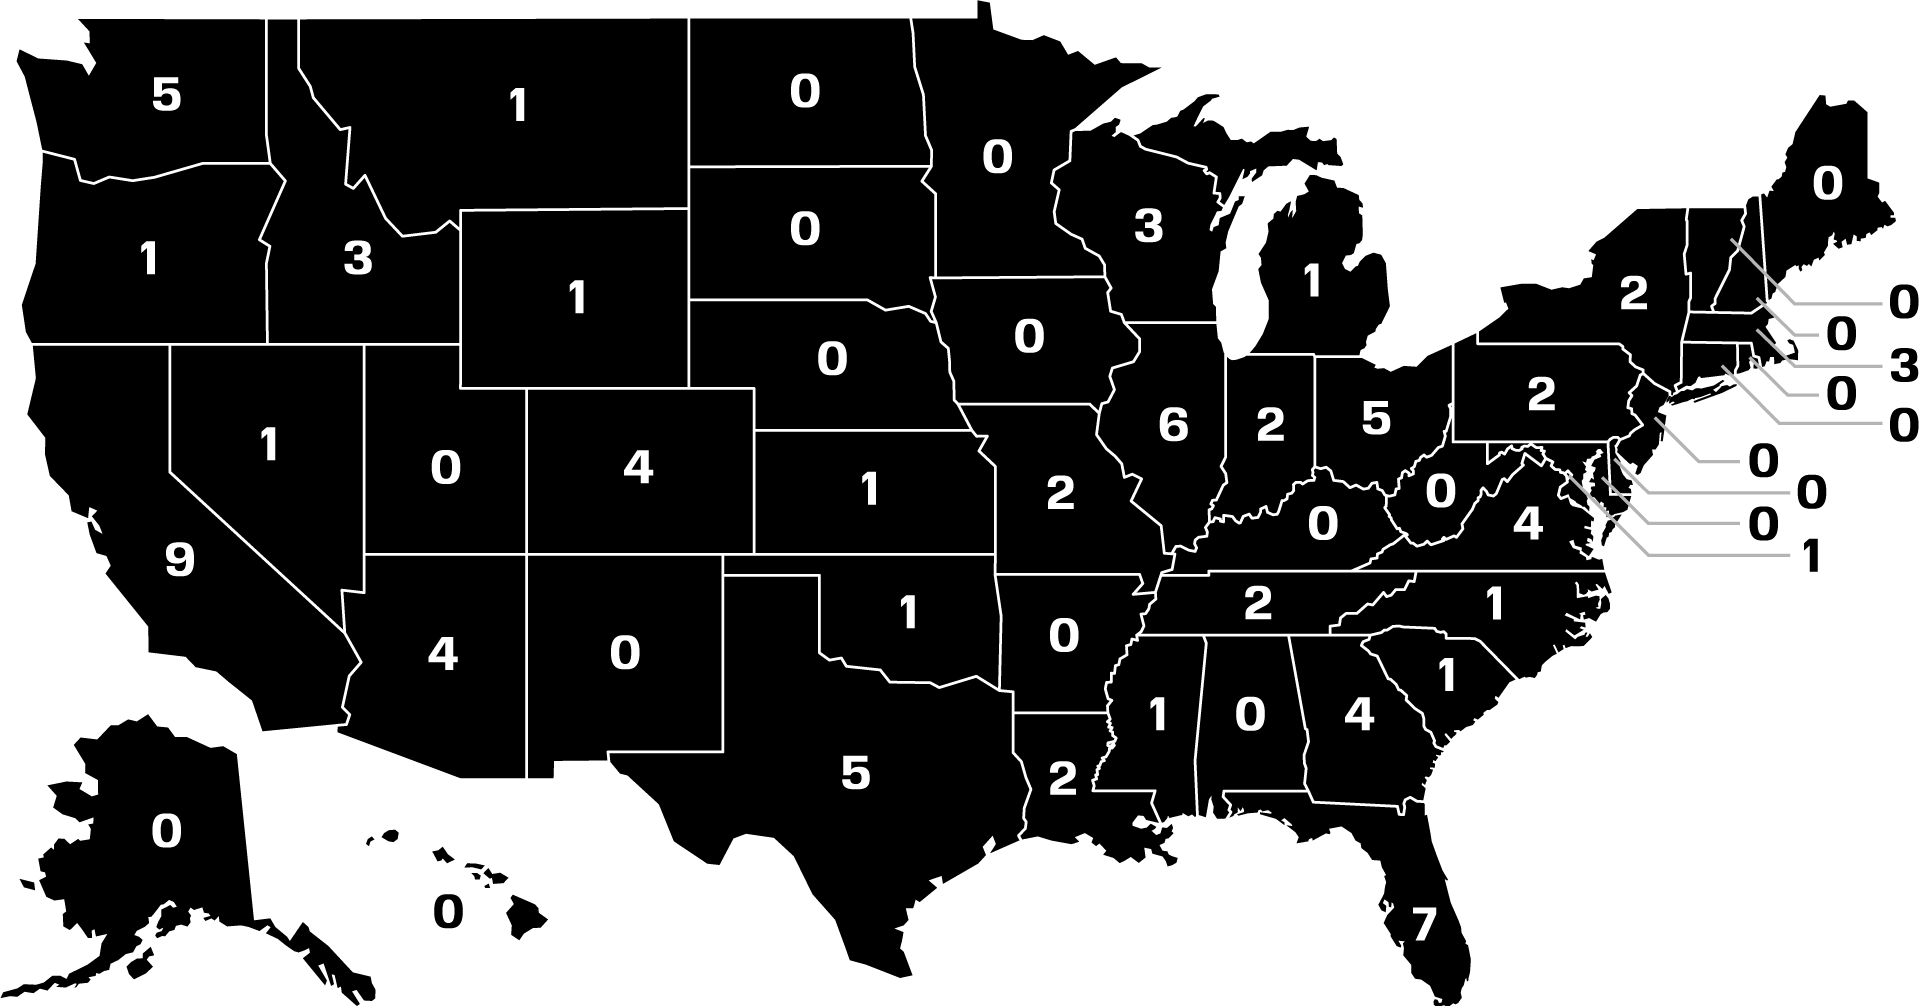 Outline map of US states with number of anti-LGBTQ groups